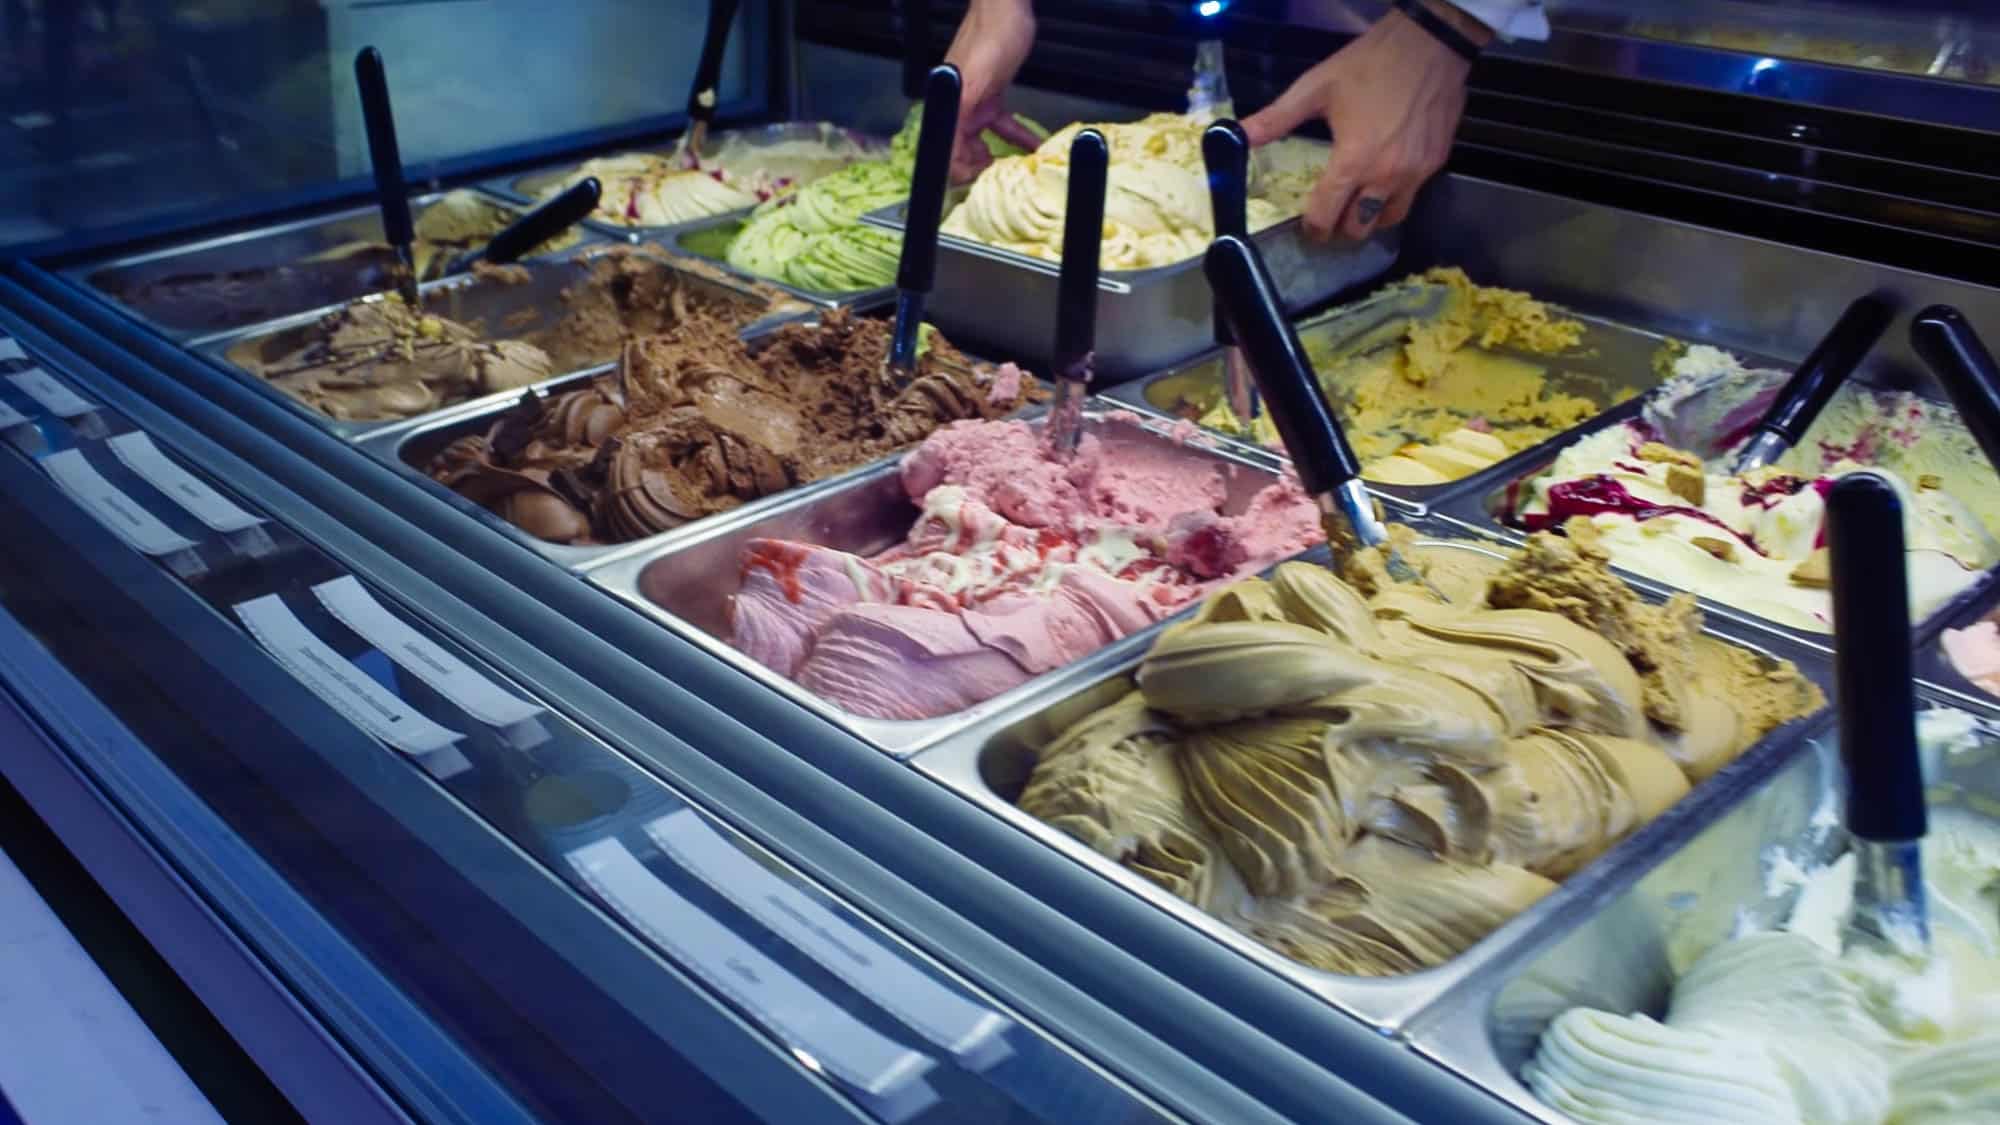 Things to do in Bristol - Swoon Gelateria